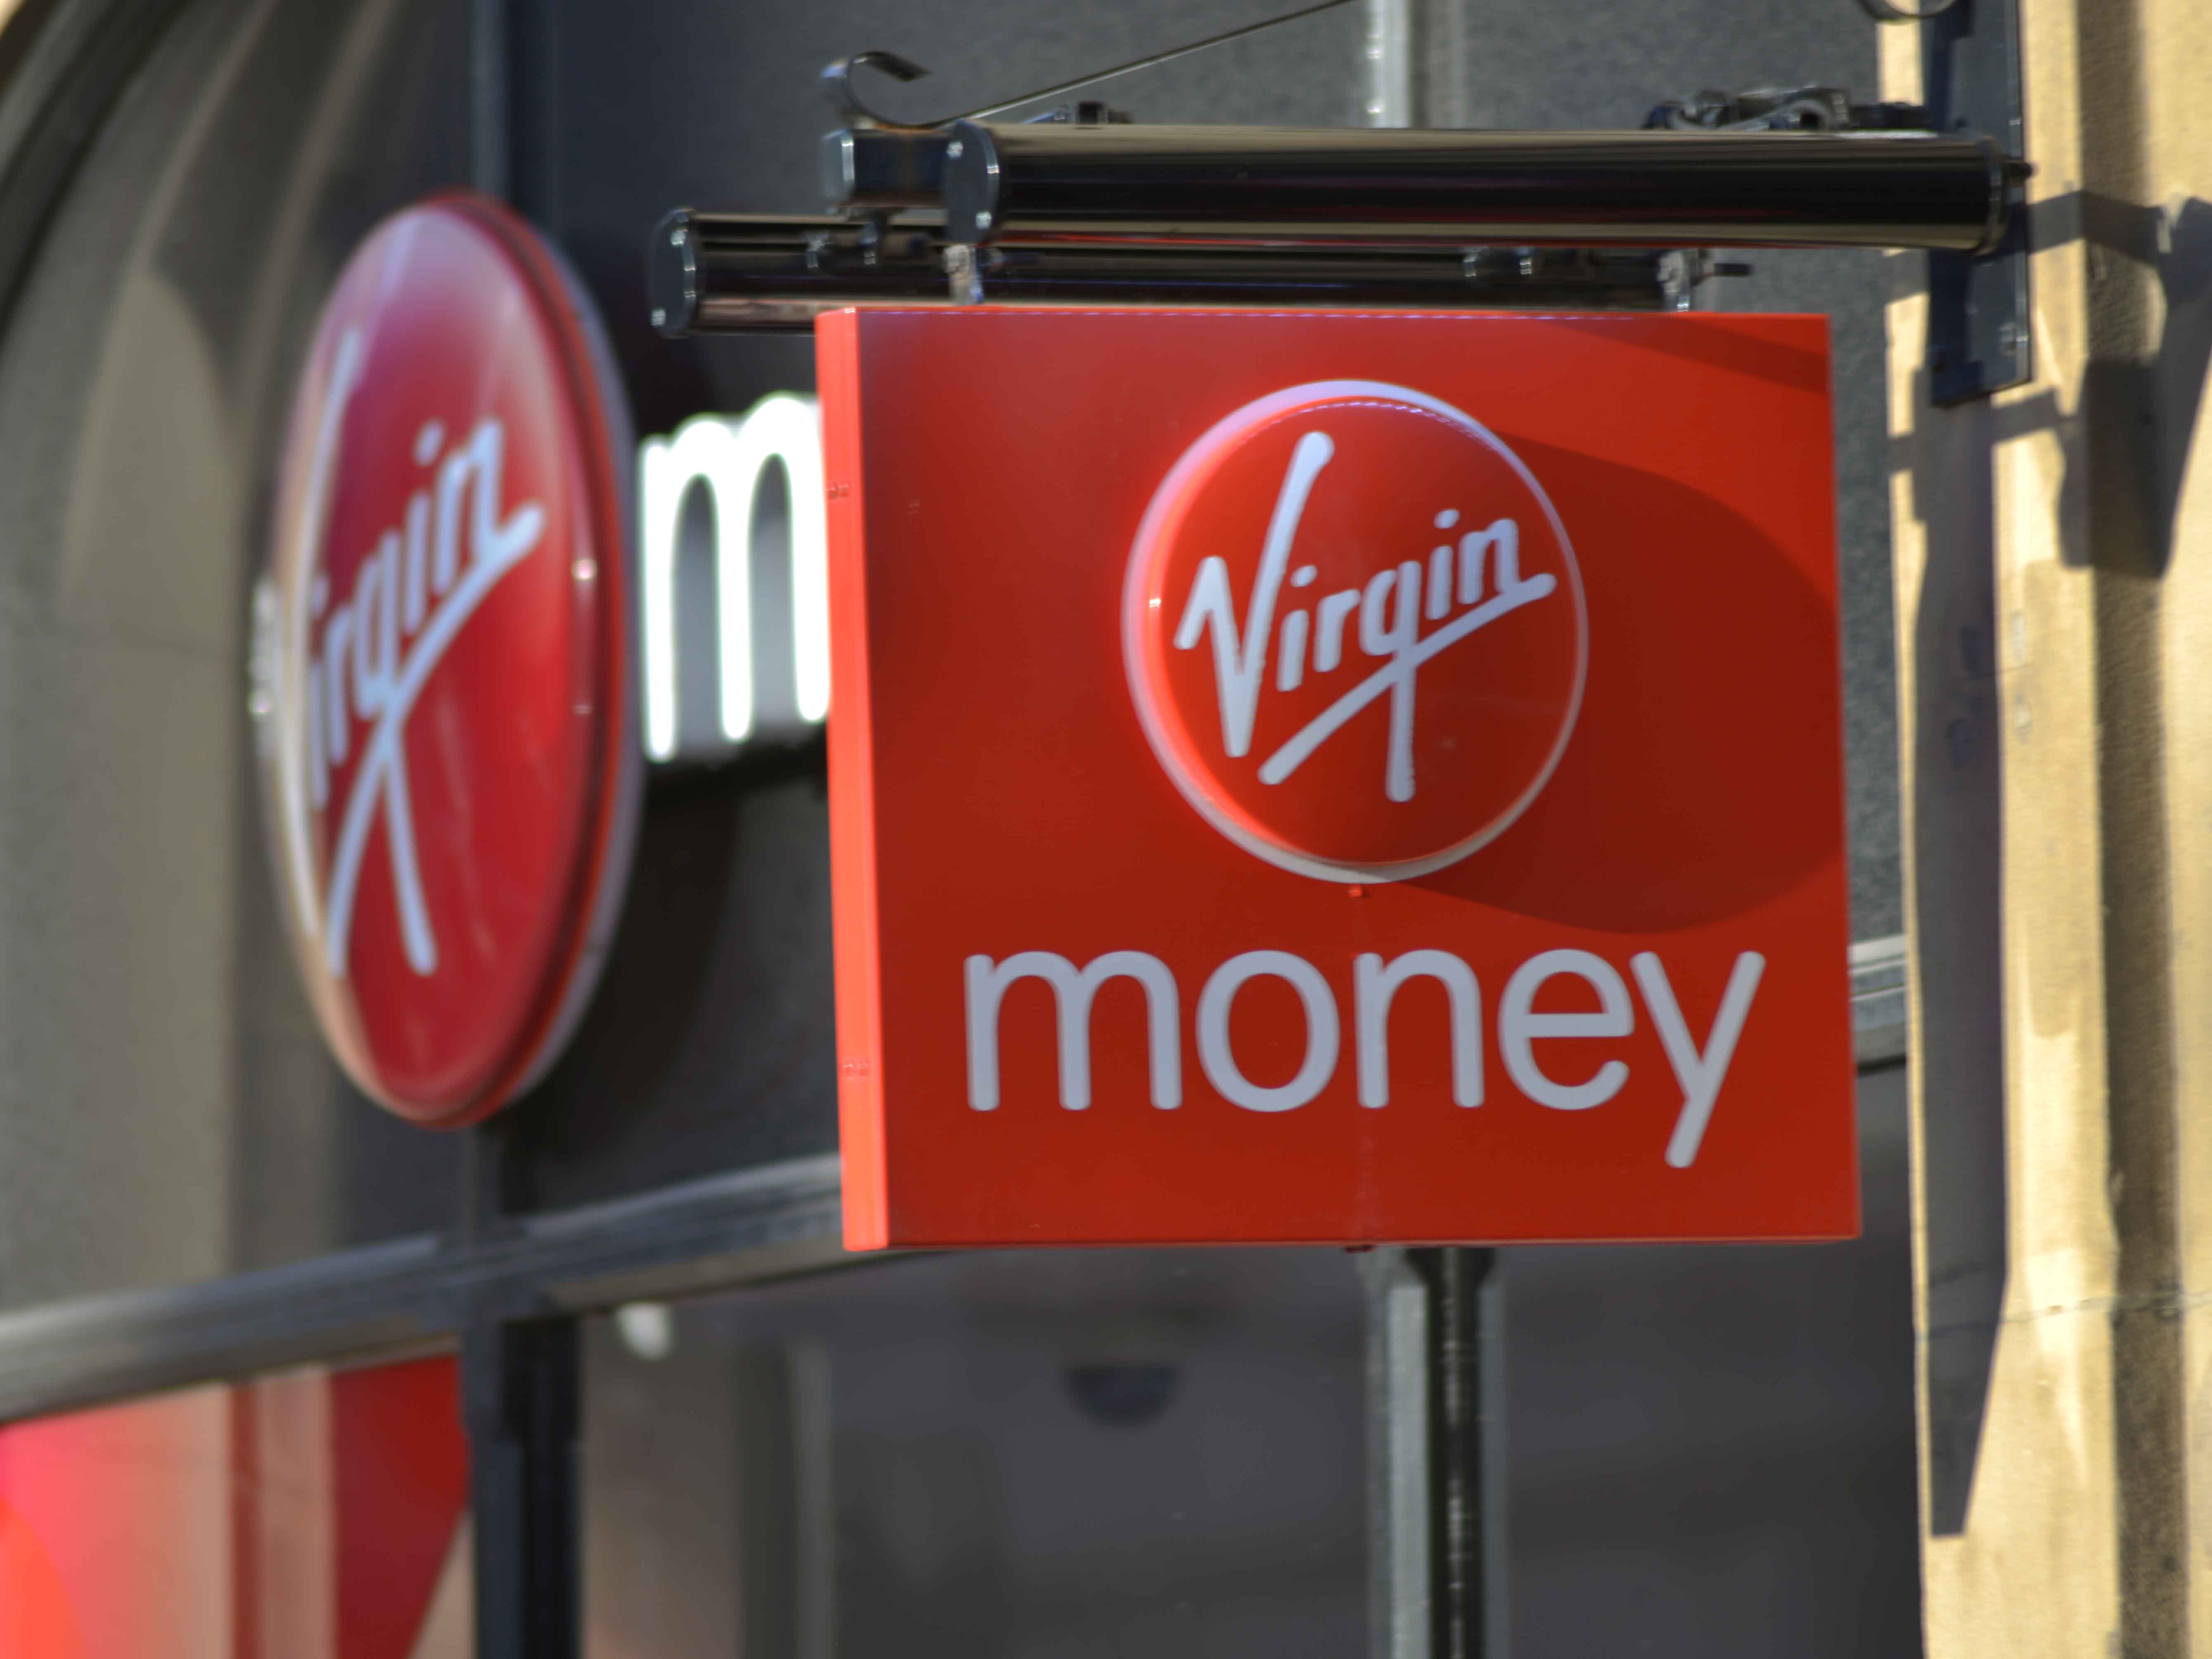 Clydesdale and Yorkshire Bank Group (CYBG) has purchased Virgin Money for $2.25bn. The joint entity will become the sixth-largest bank in the UK